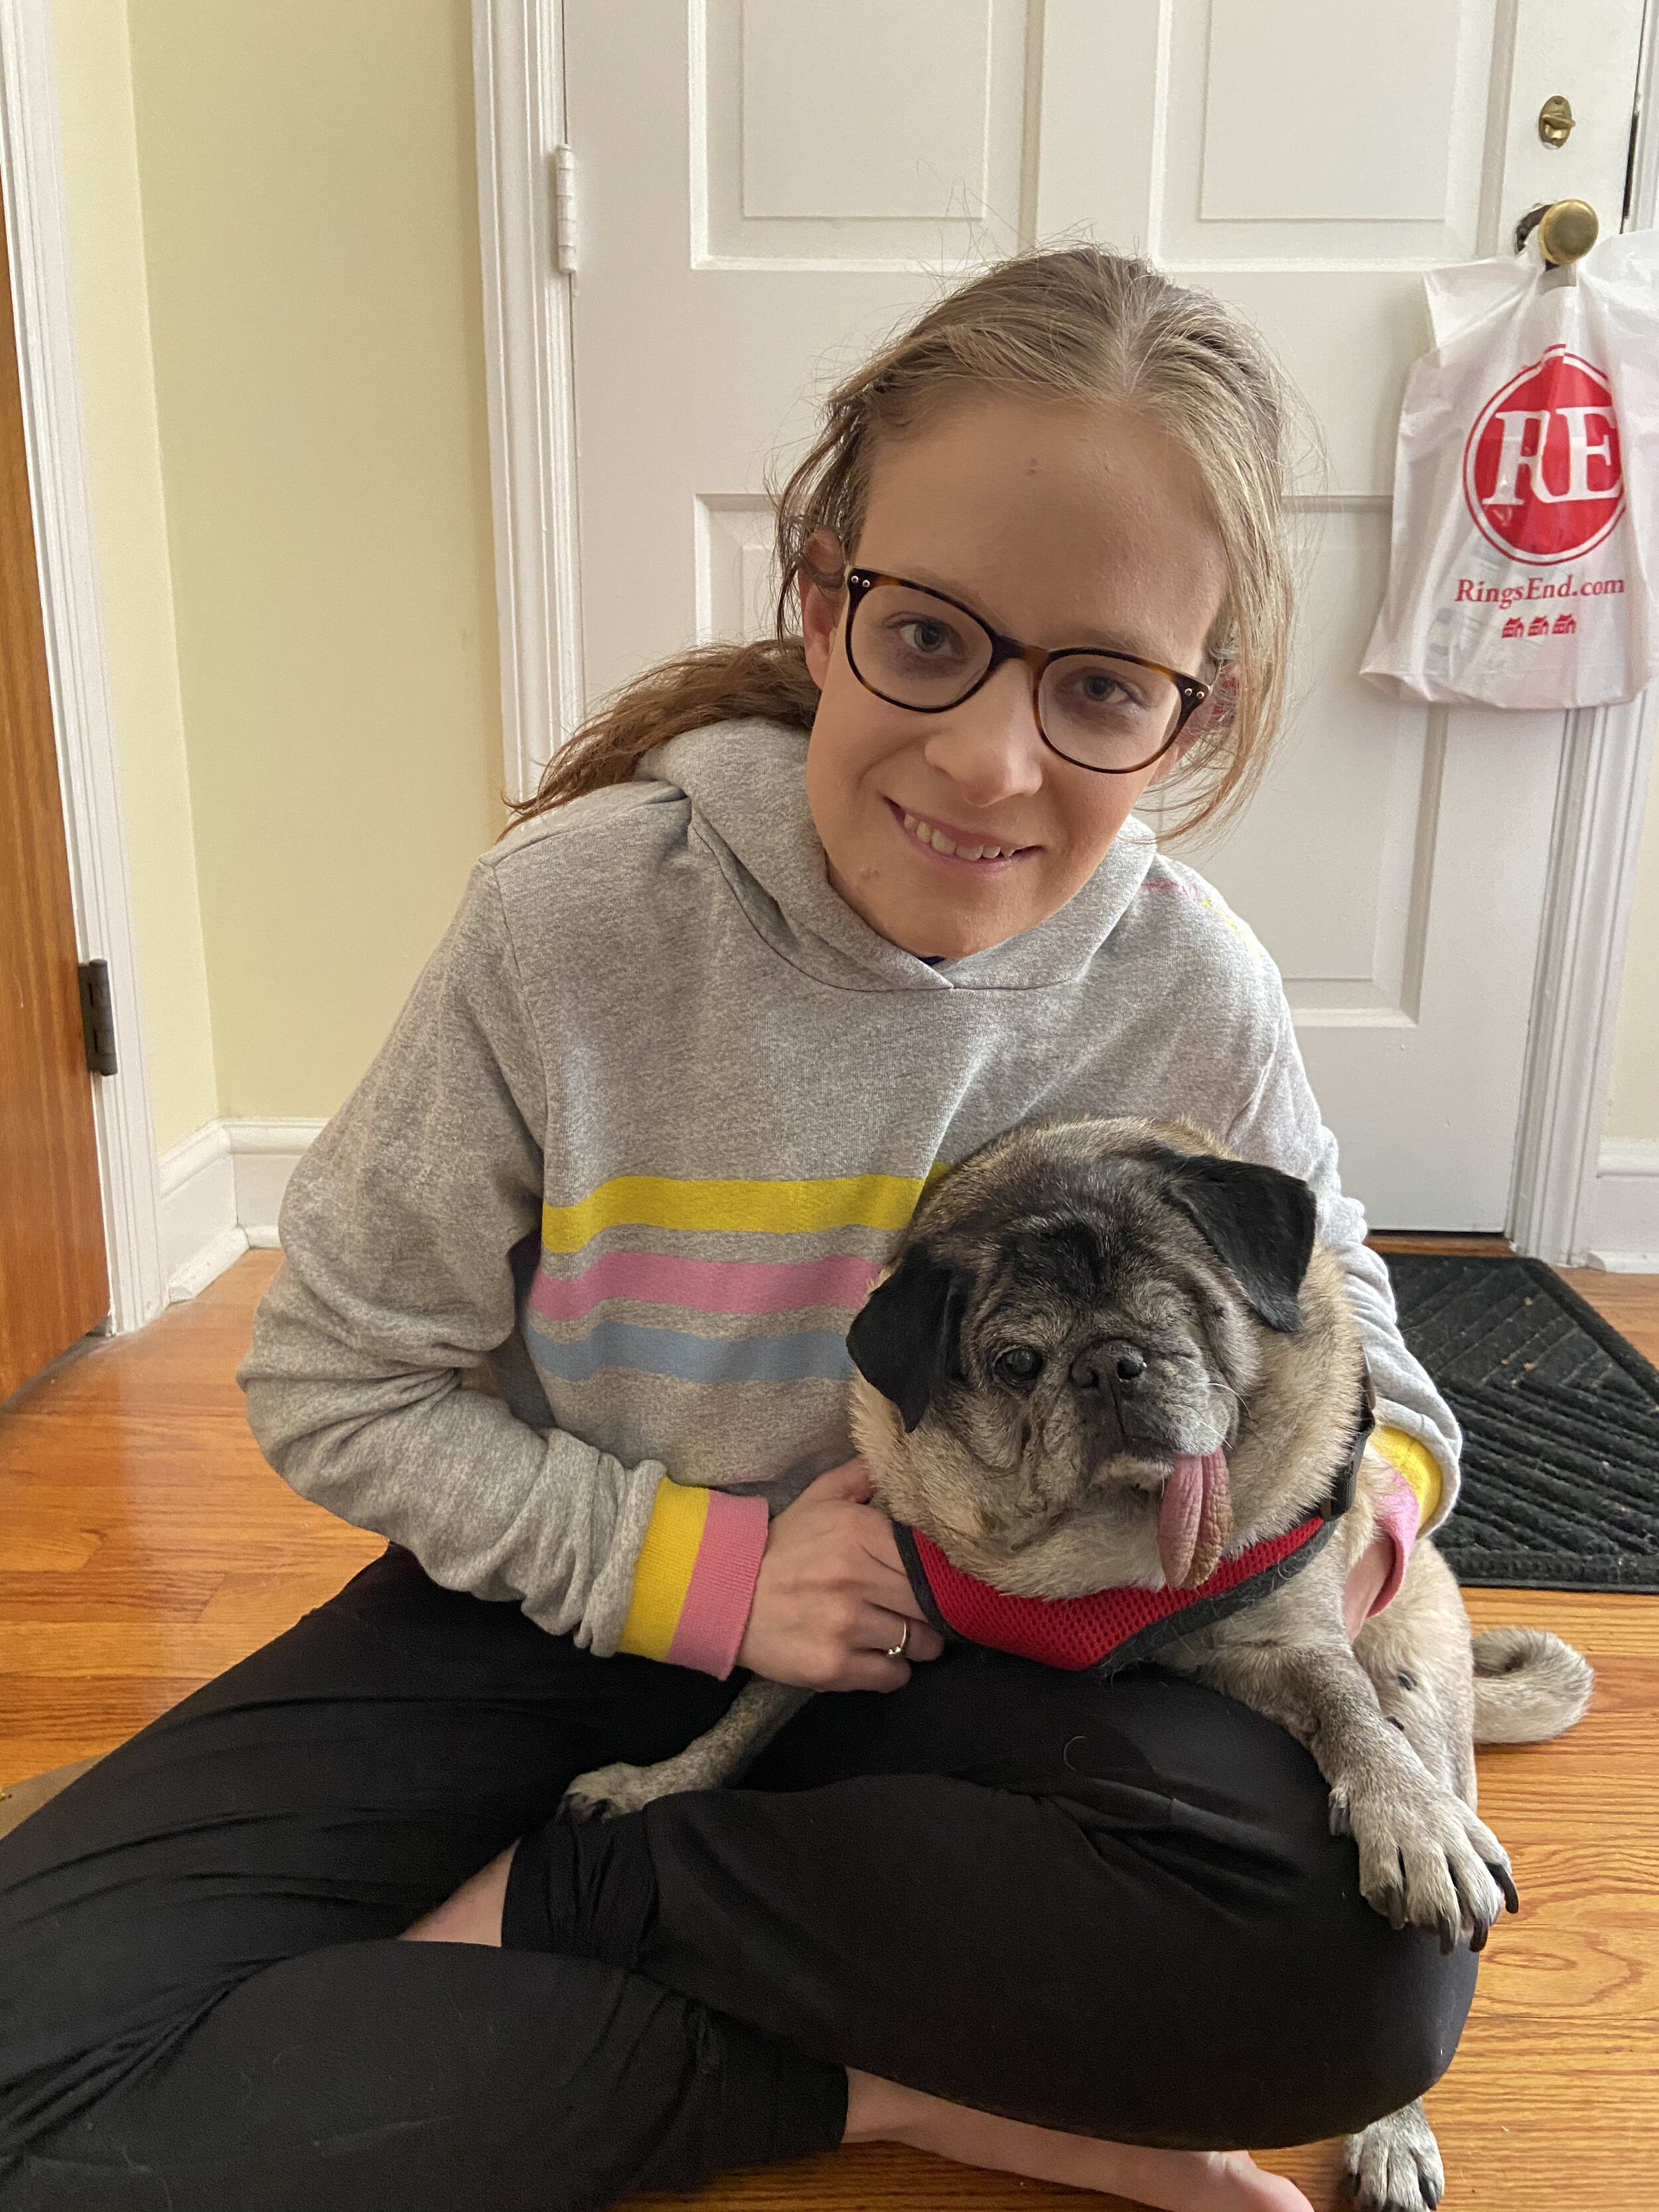 The blogger hanging out with her pug friend, Victoria.